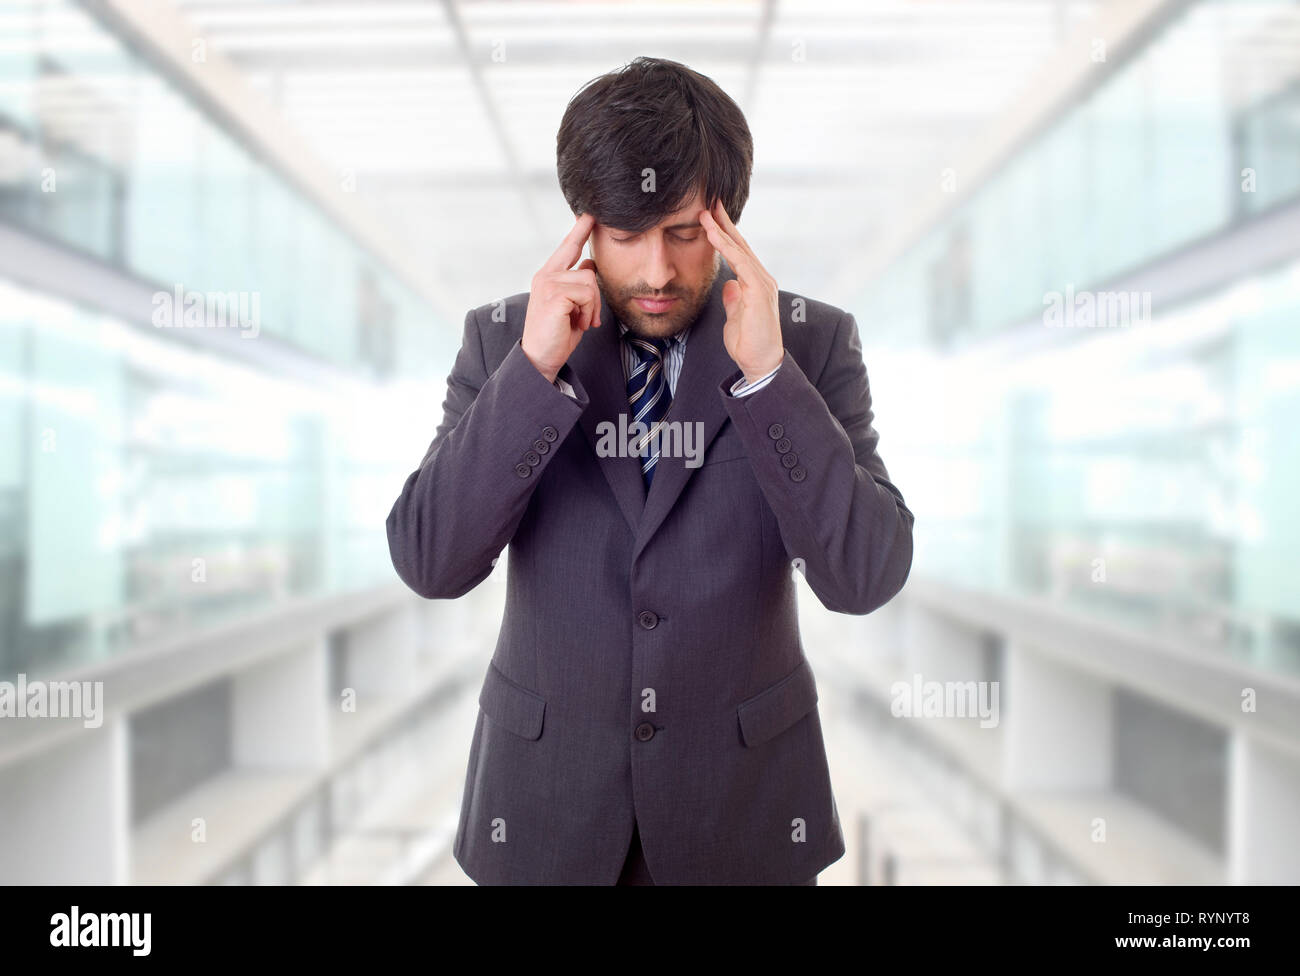 Businessman in a suit gestures with a headache, at the office Stock Photo